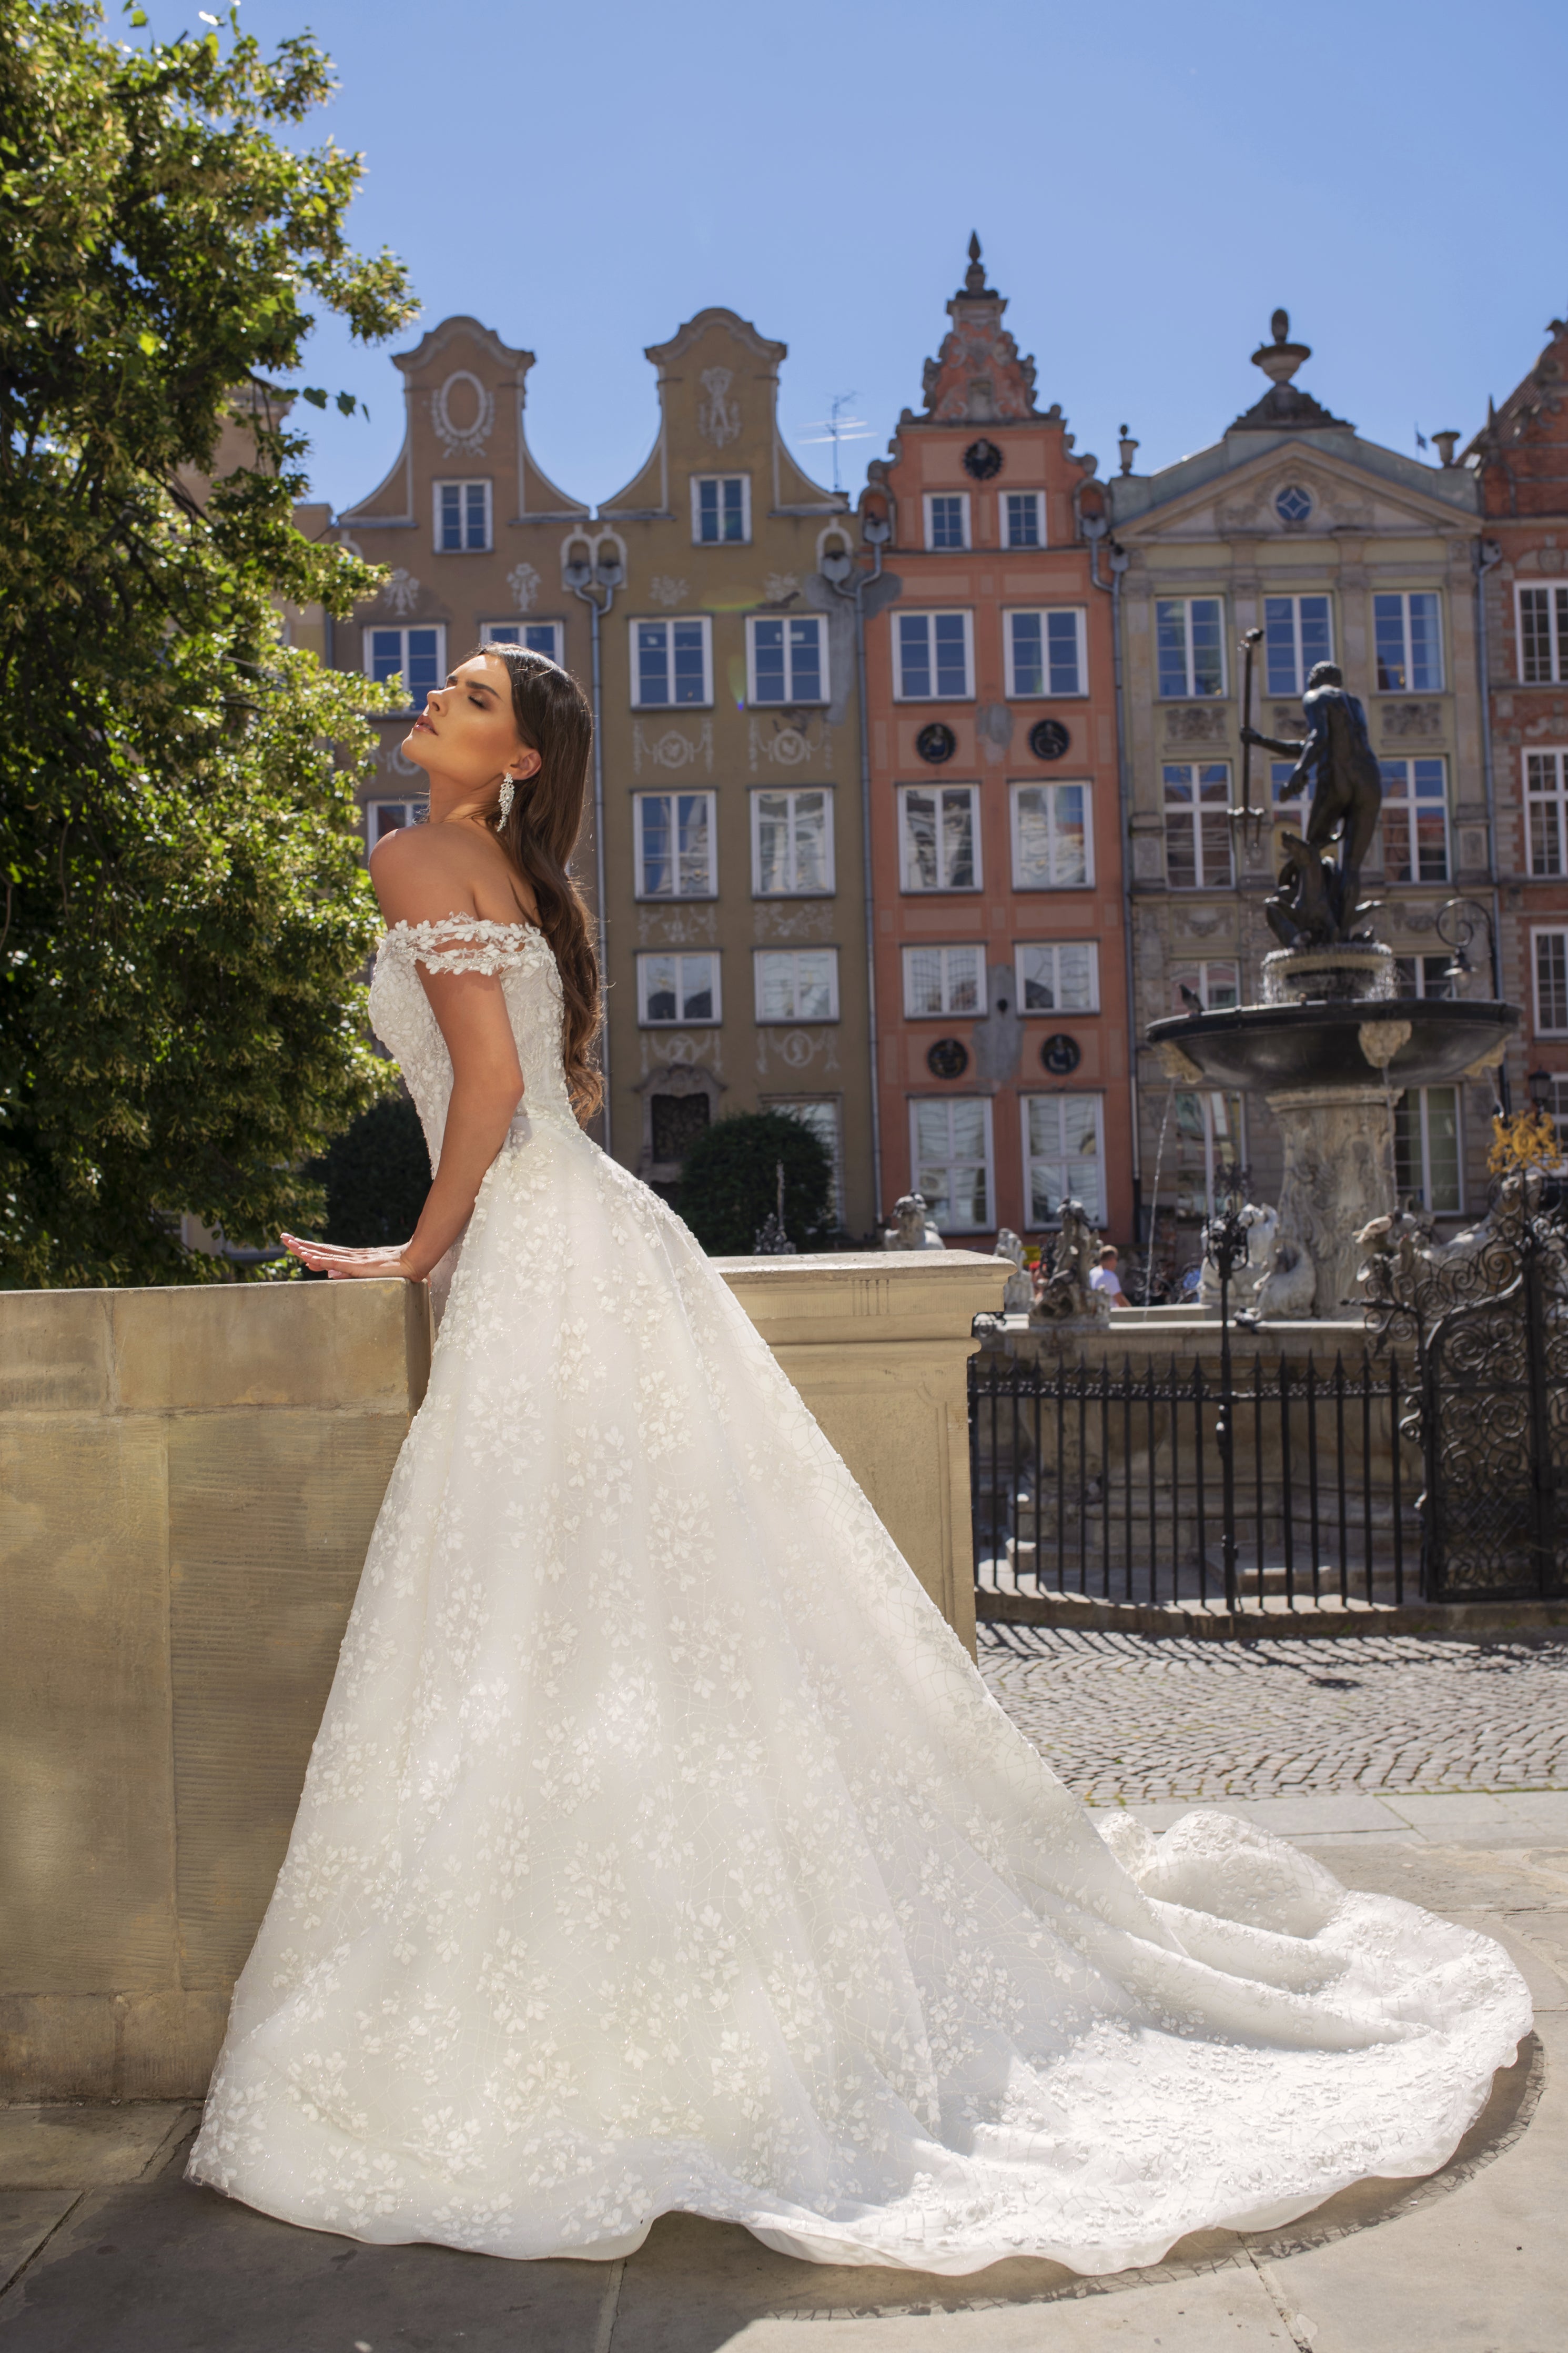 My Wedding Dress Shopping Experience – Better with Ju